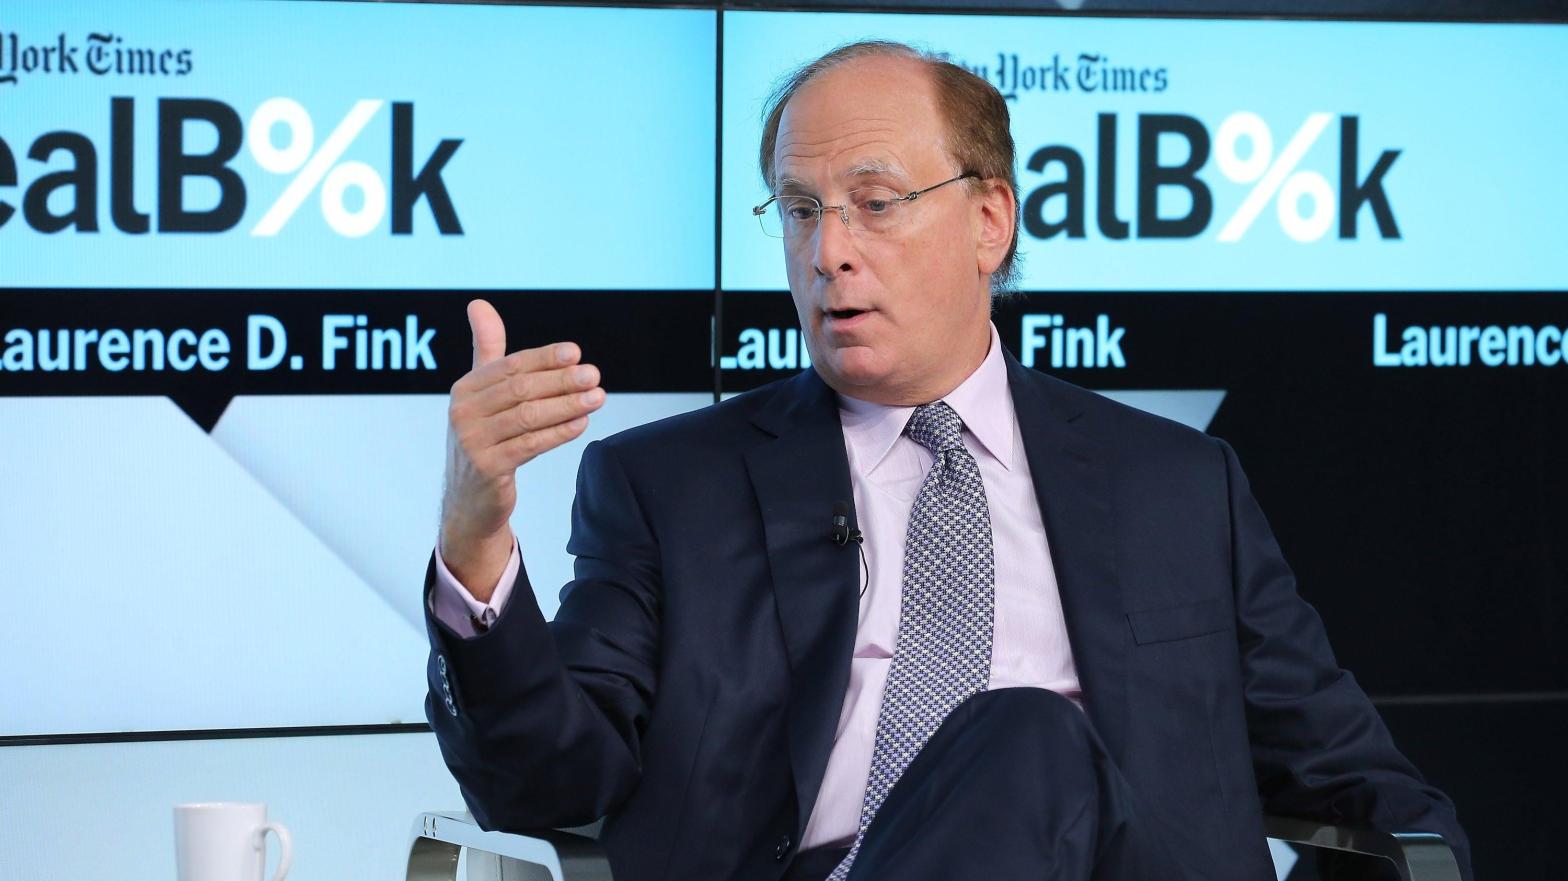 Blackrock CEO Larry Fink participates in a panel discussion at the New York Times 2015 DealBook Conference at the Whitney Museum of American Art on November 3, 2015 in New York City. (Photo: Neilson Barnard, Getty Images)